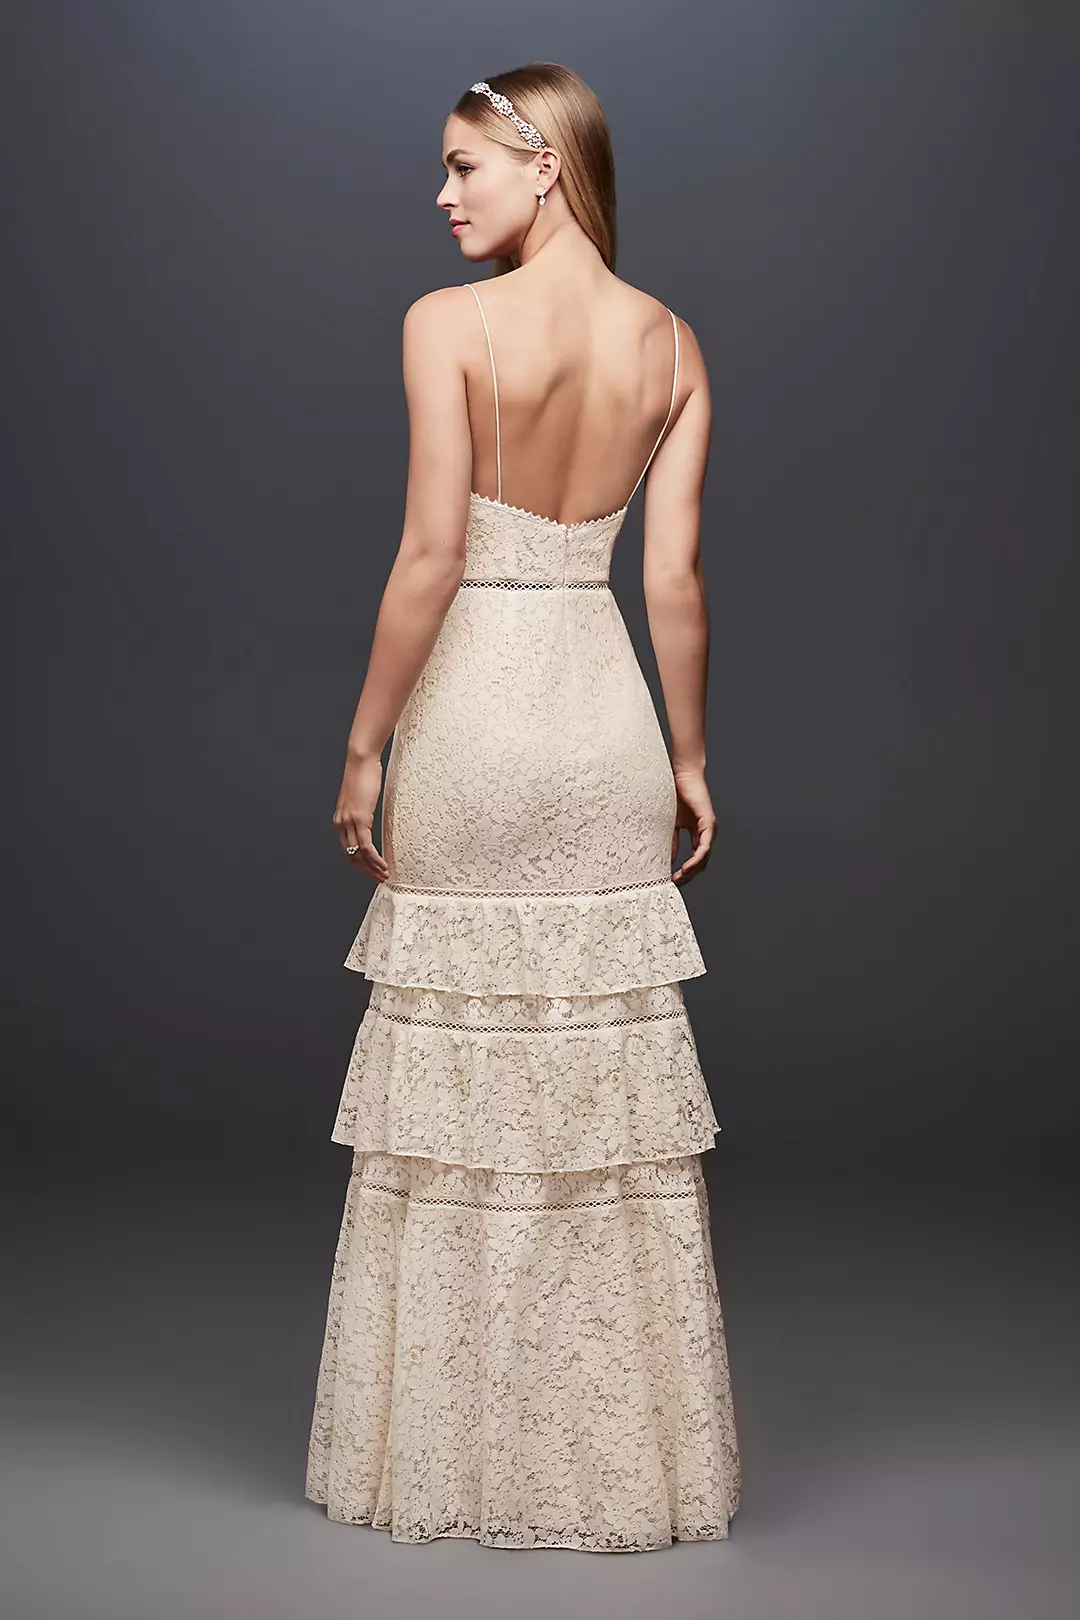 Tiered Lace Sheath Gown with Openwork Insets  Image 2